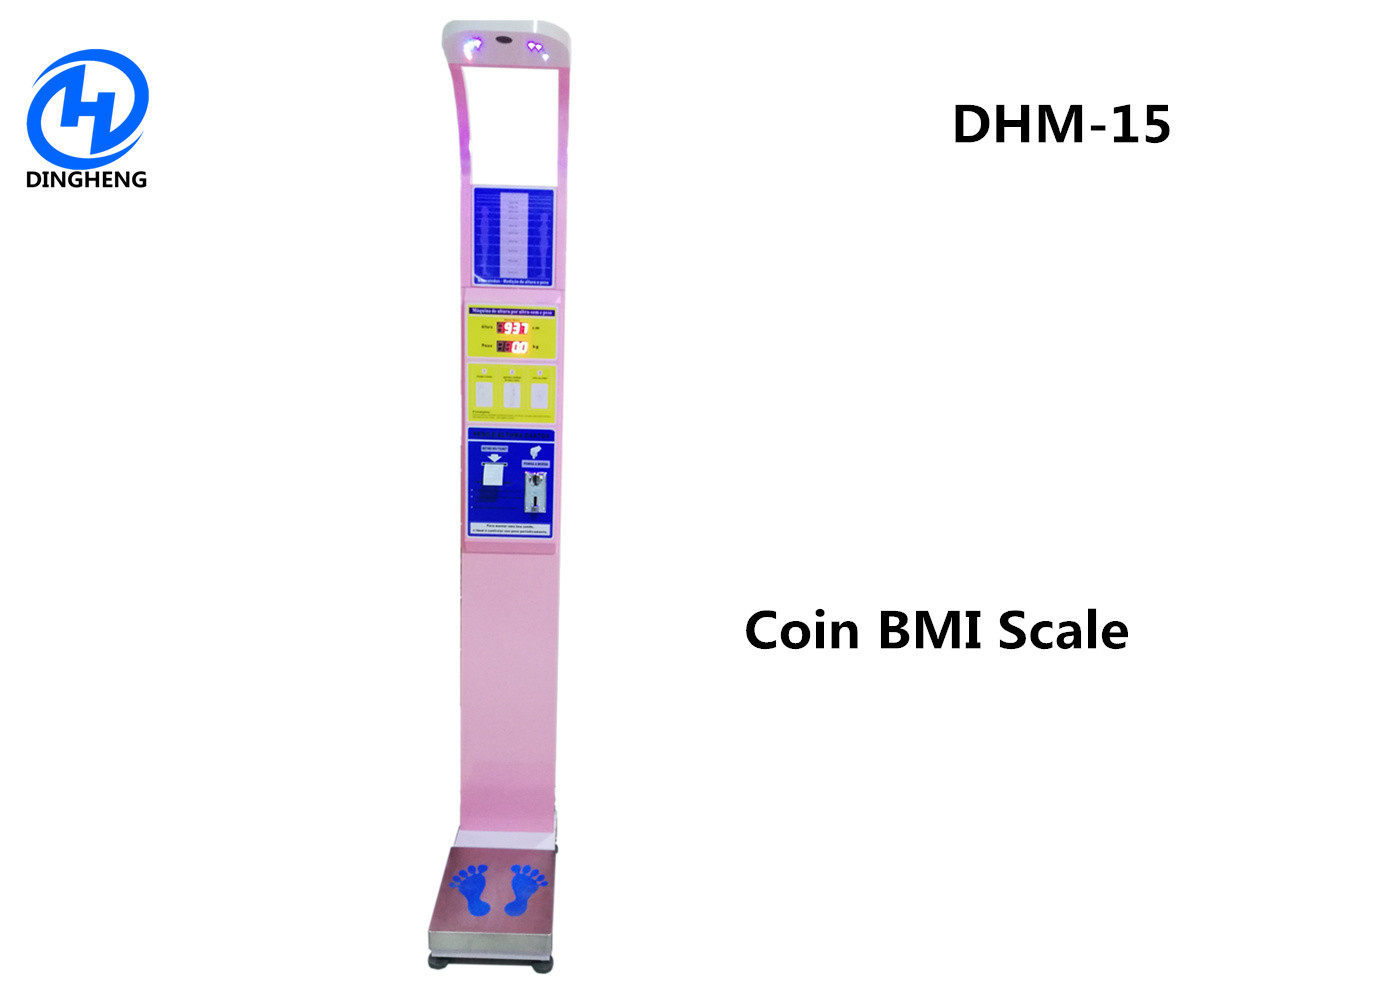 Best Iron medical height and weight scales with BMI analysis and coin wholesale